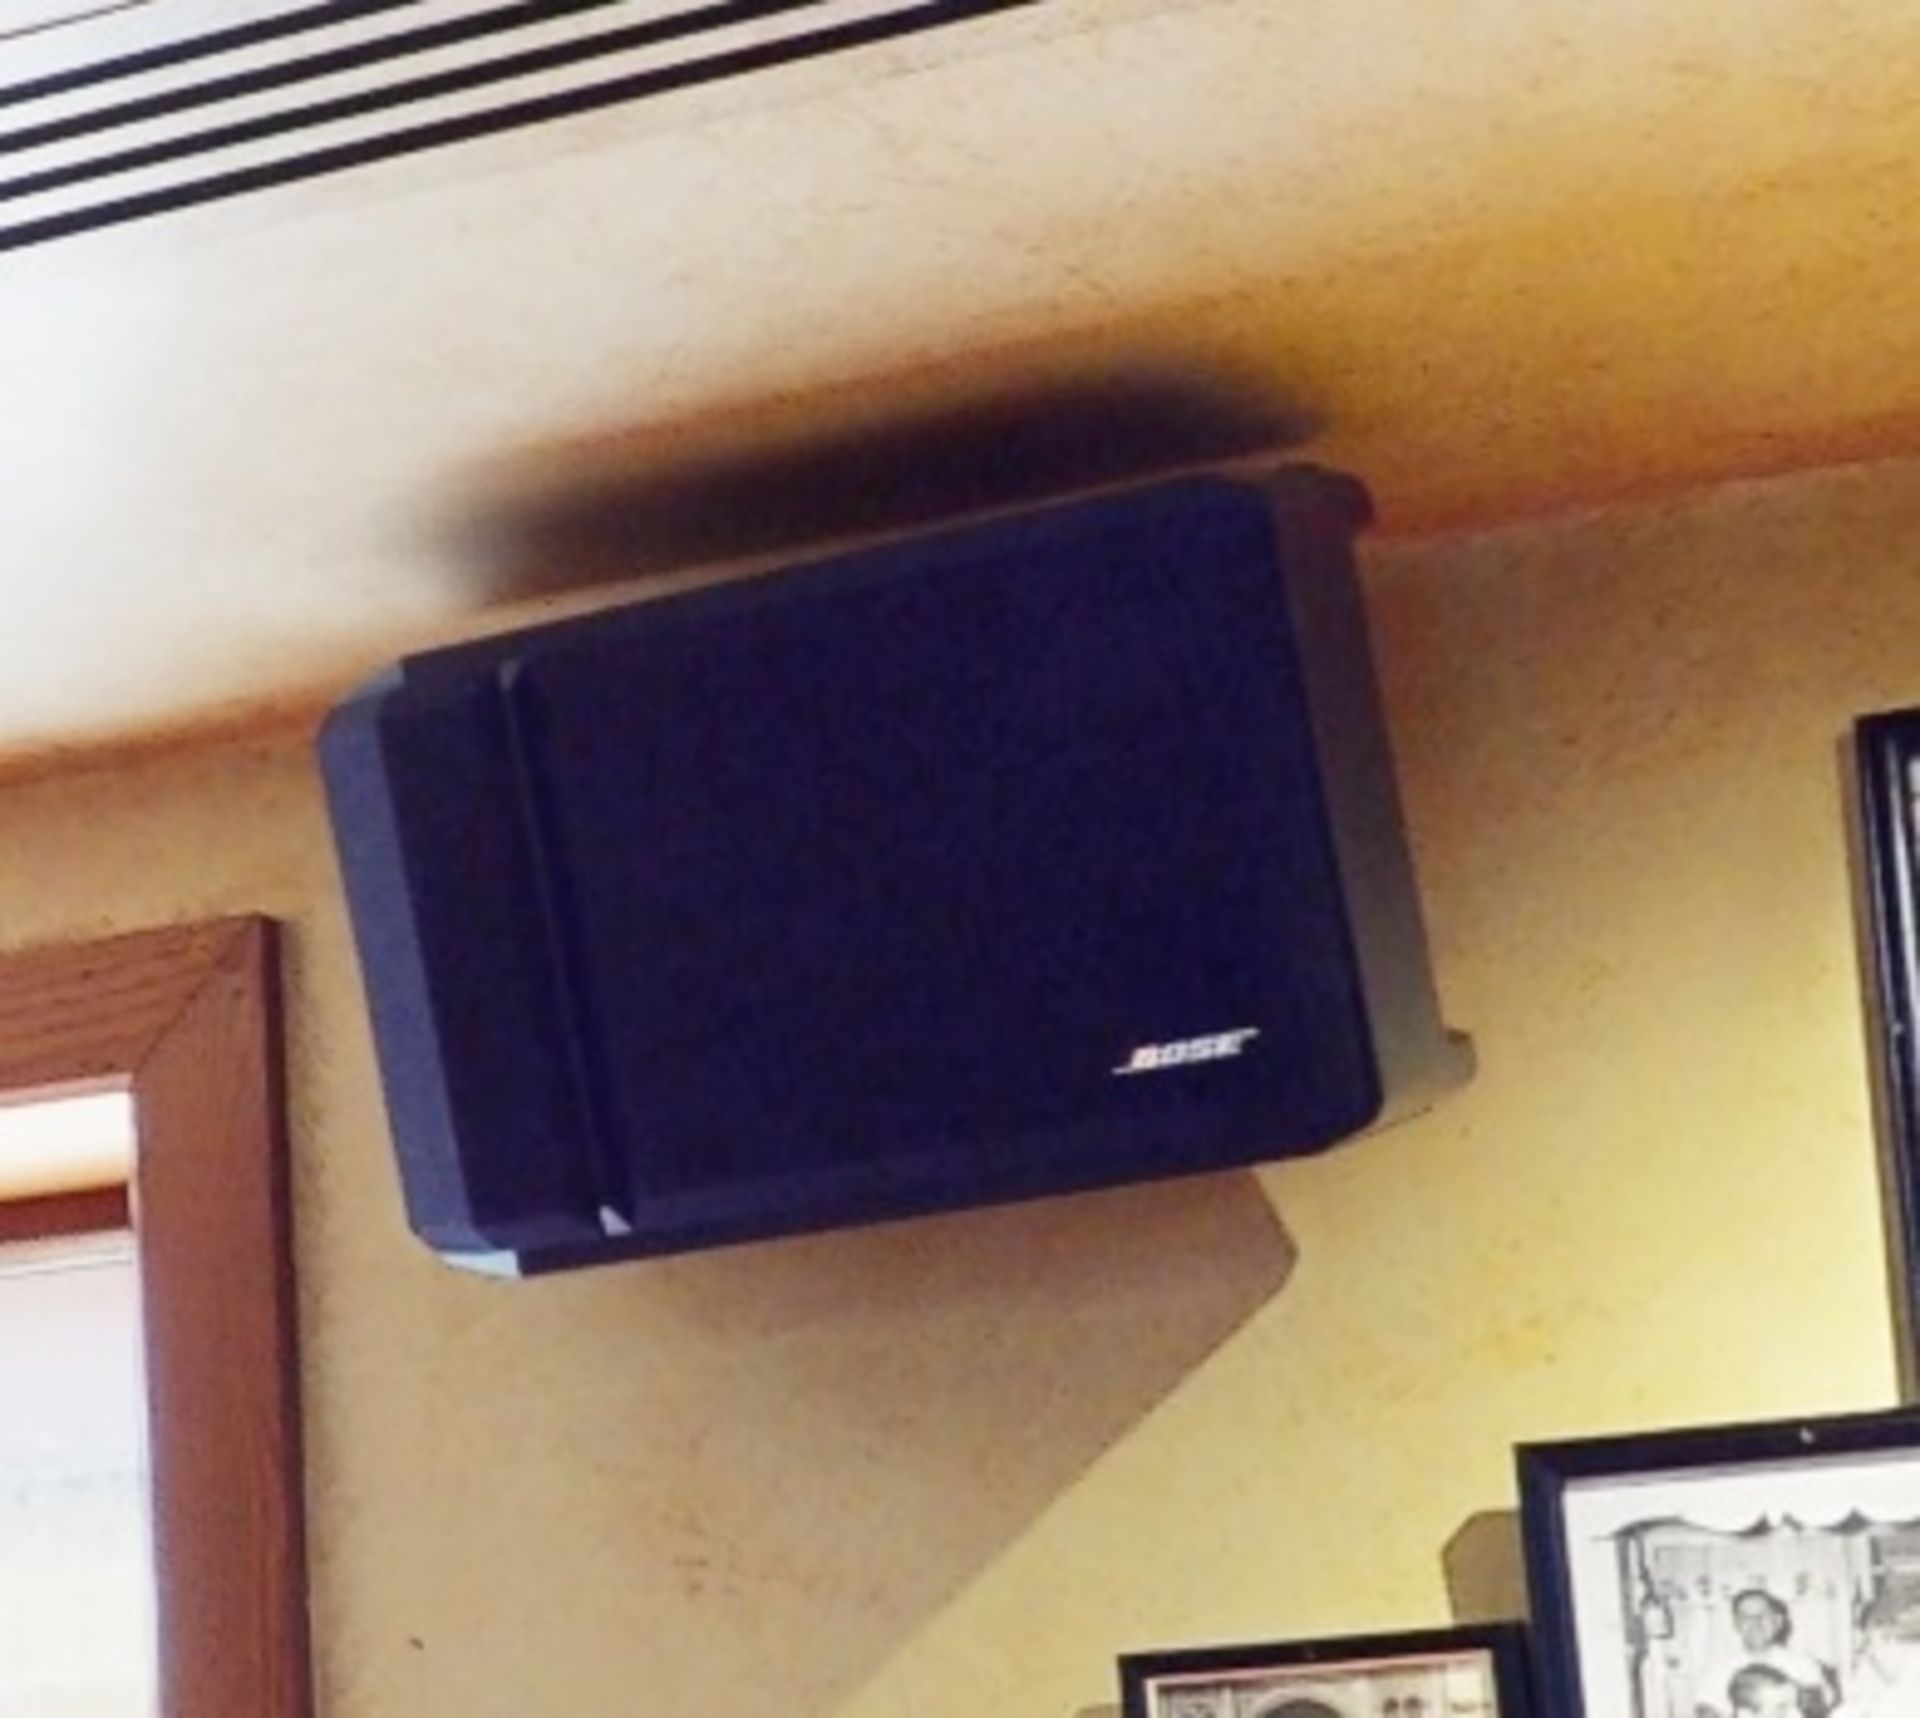 1 x Restaurant Audio System Including 1 x QSC RMX850 Amplifier, 12 x Bose Speaker System & More! - Image 11 of 17